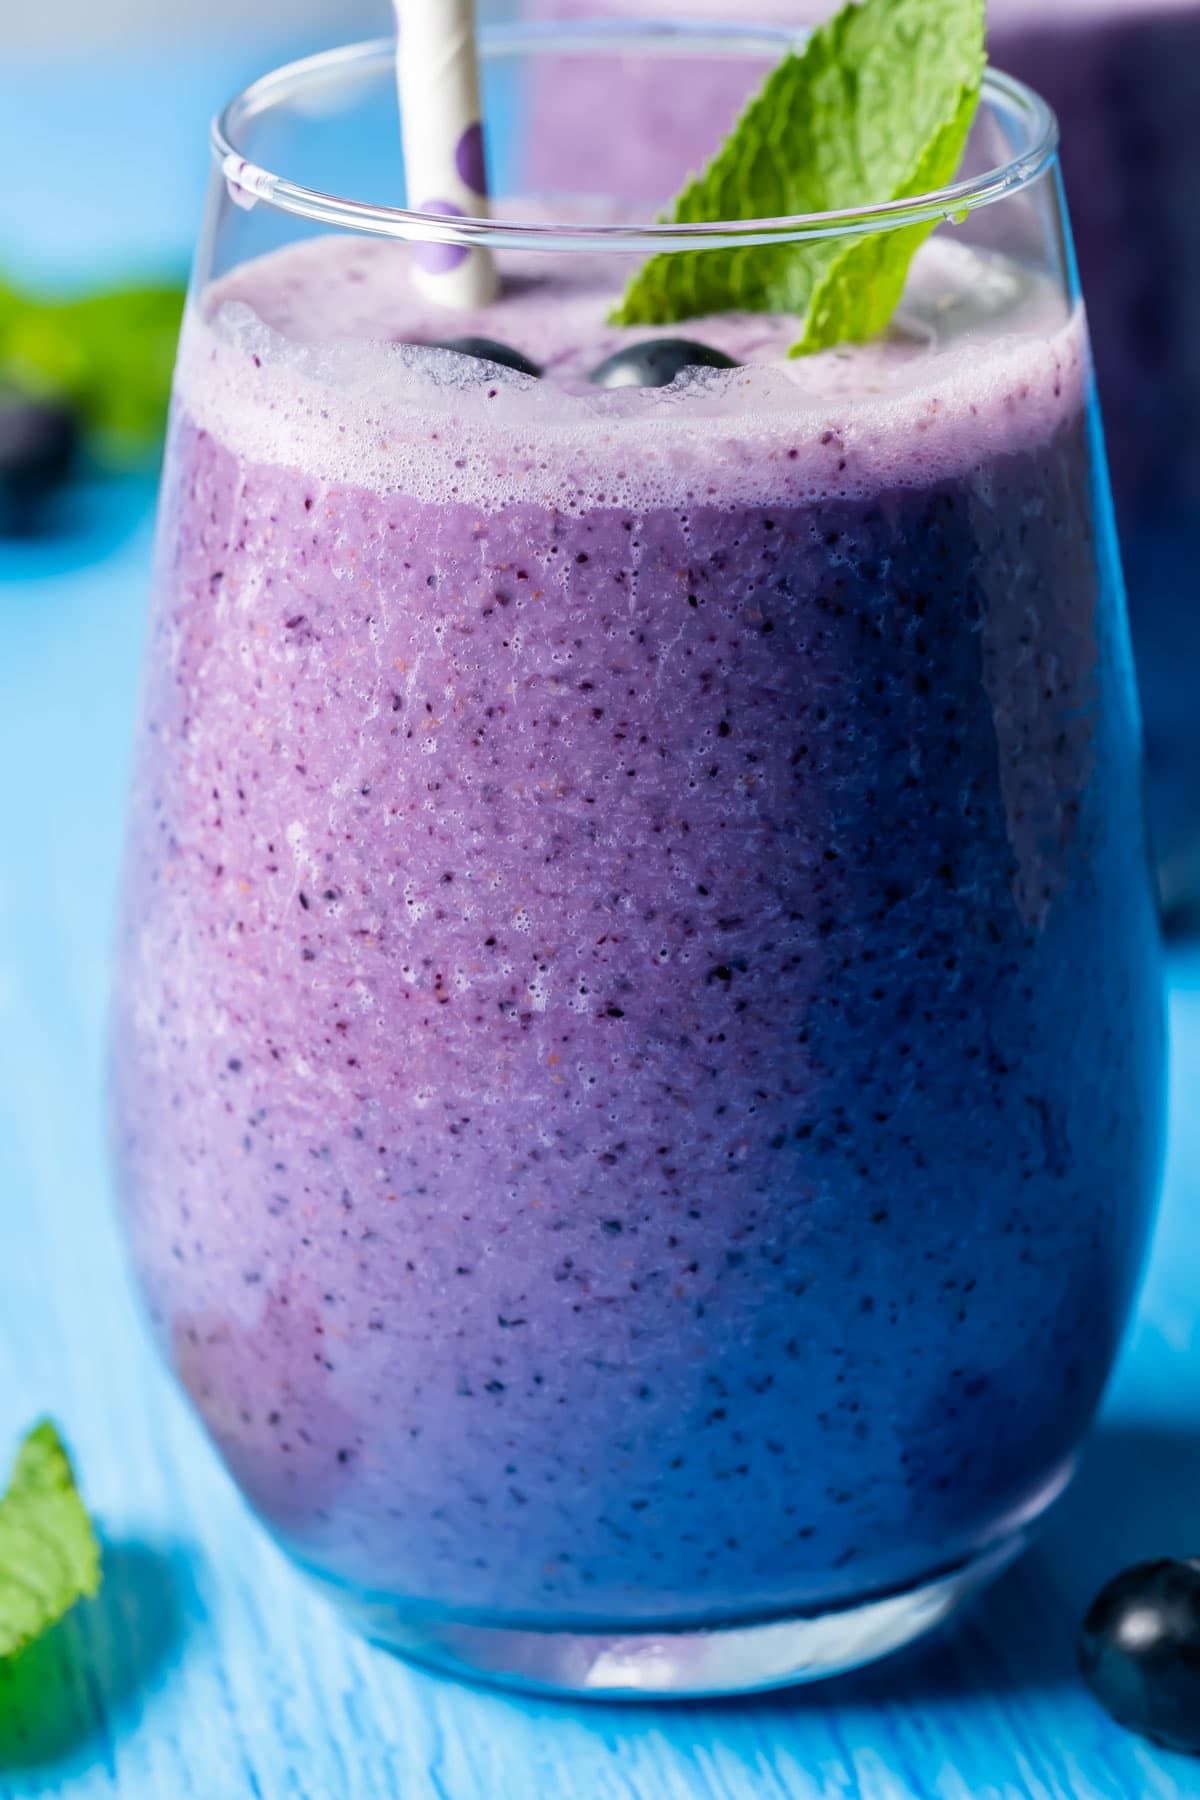 Blueberry smoothie in a glass with a straw and fresh mint leaves.